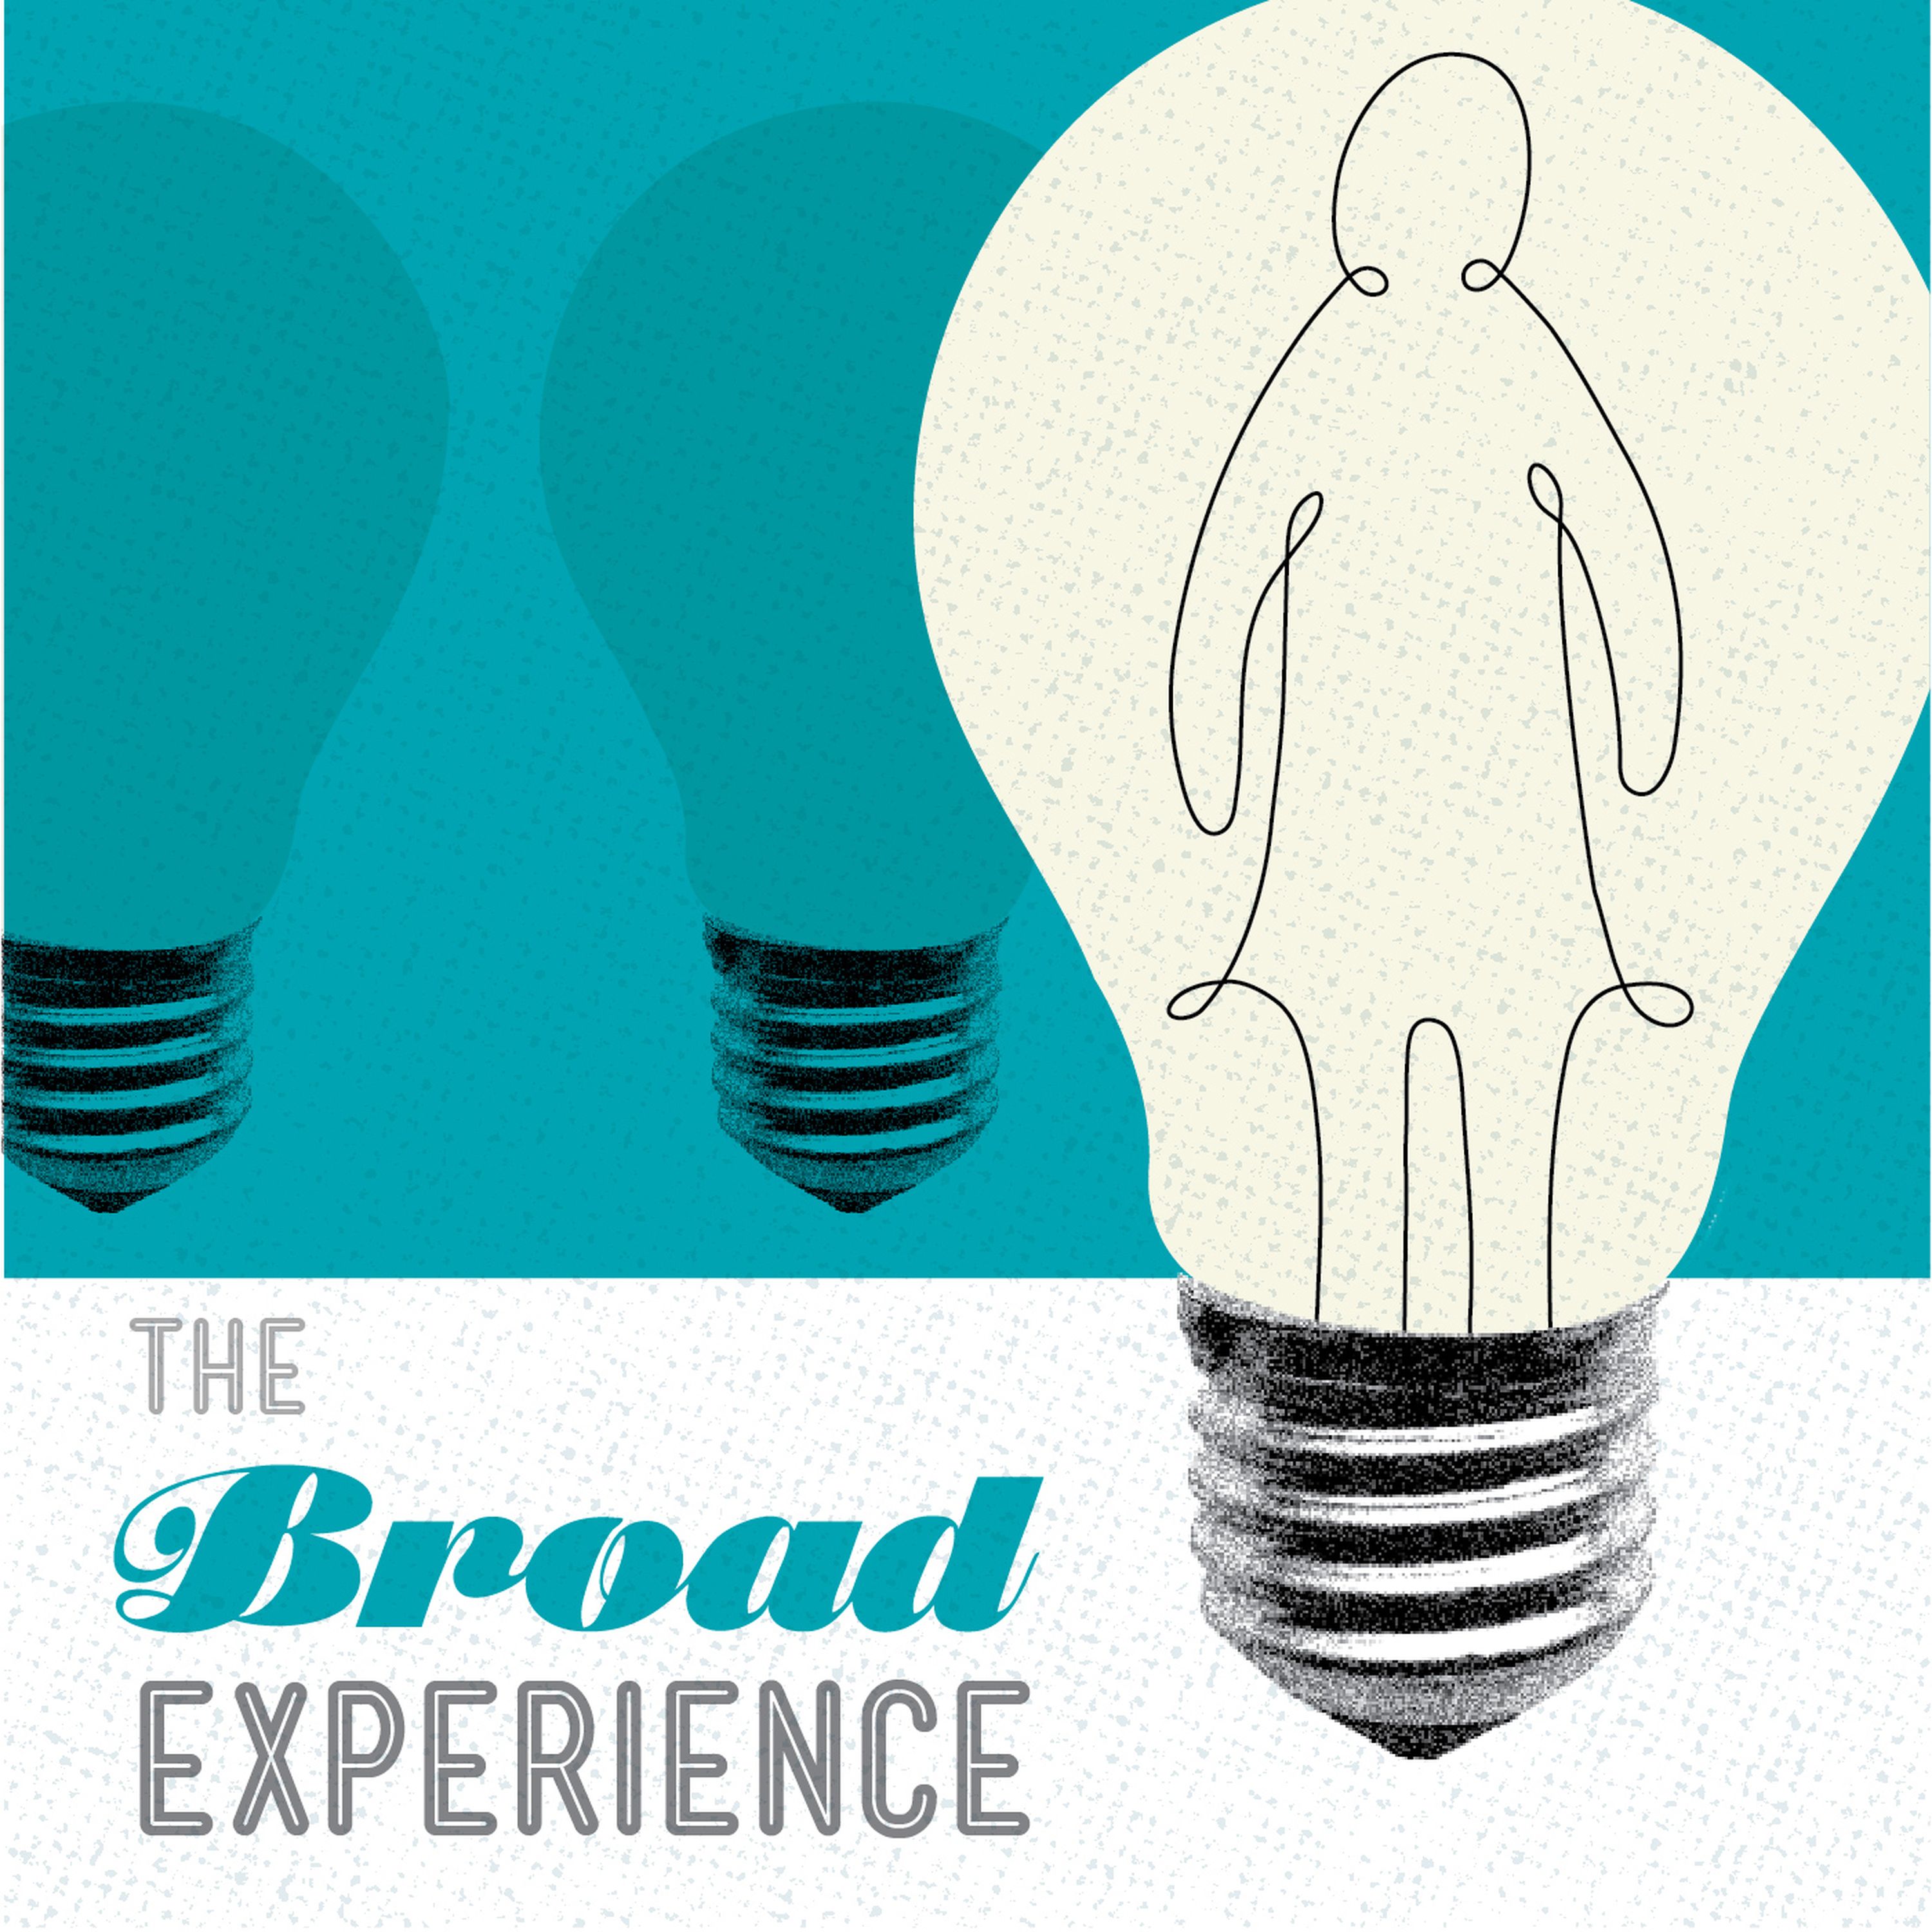 The Broad Experience 29: Show me the money